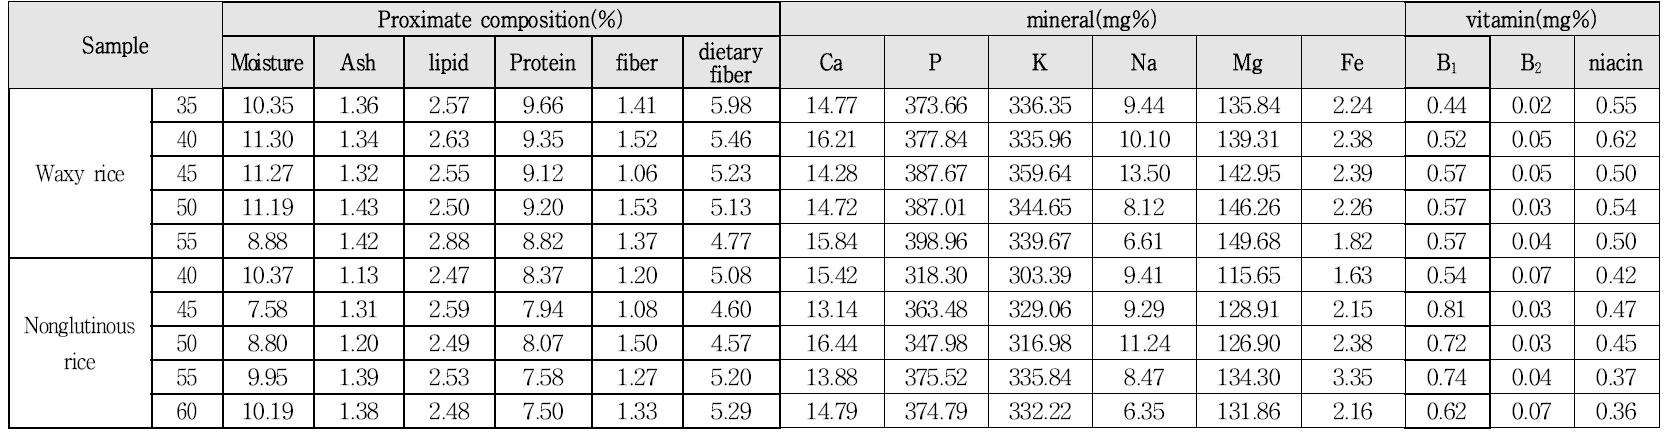 Proximate composition, mineral and vitamin contents of rough rice harvested at different mature stages.